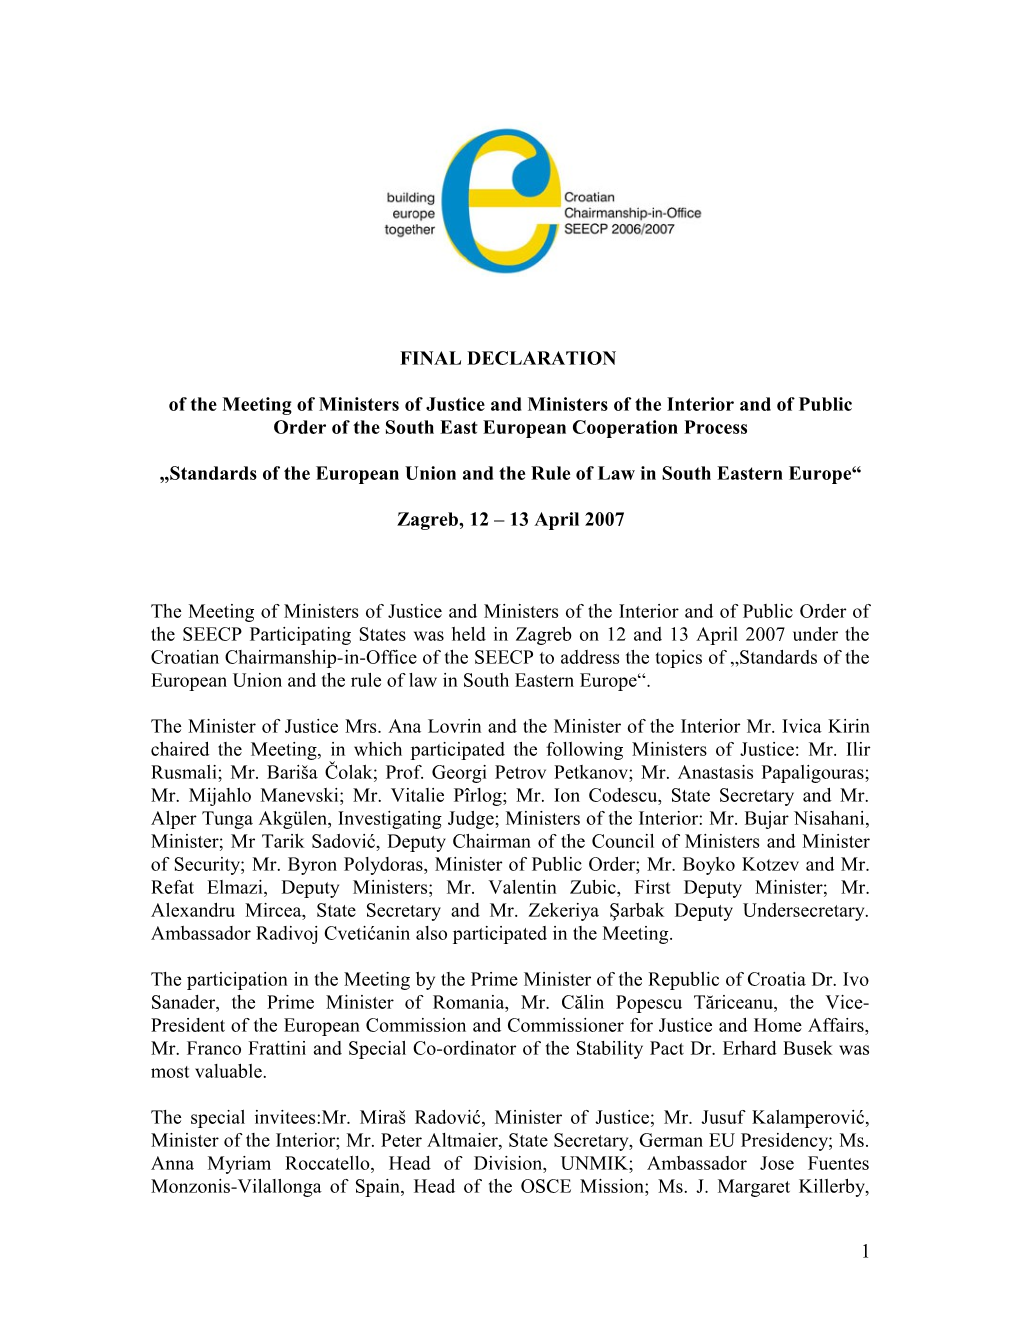 Standards of the European Union and the Rule of Law in South Eastern Europe